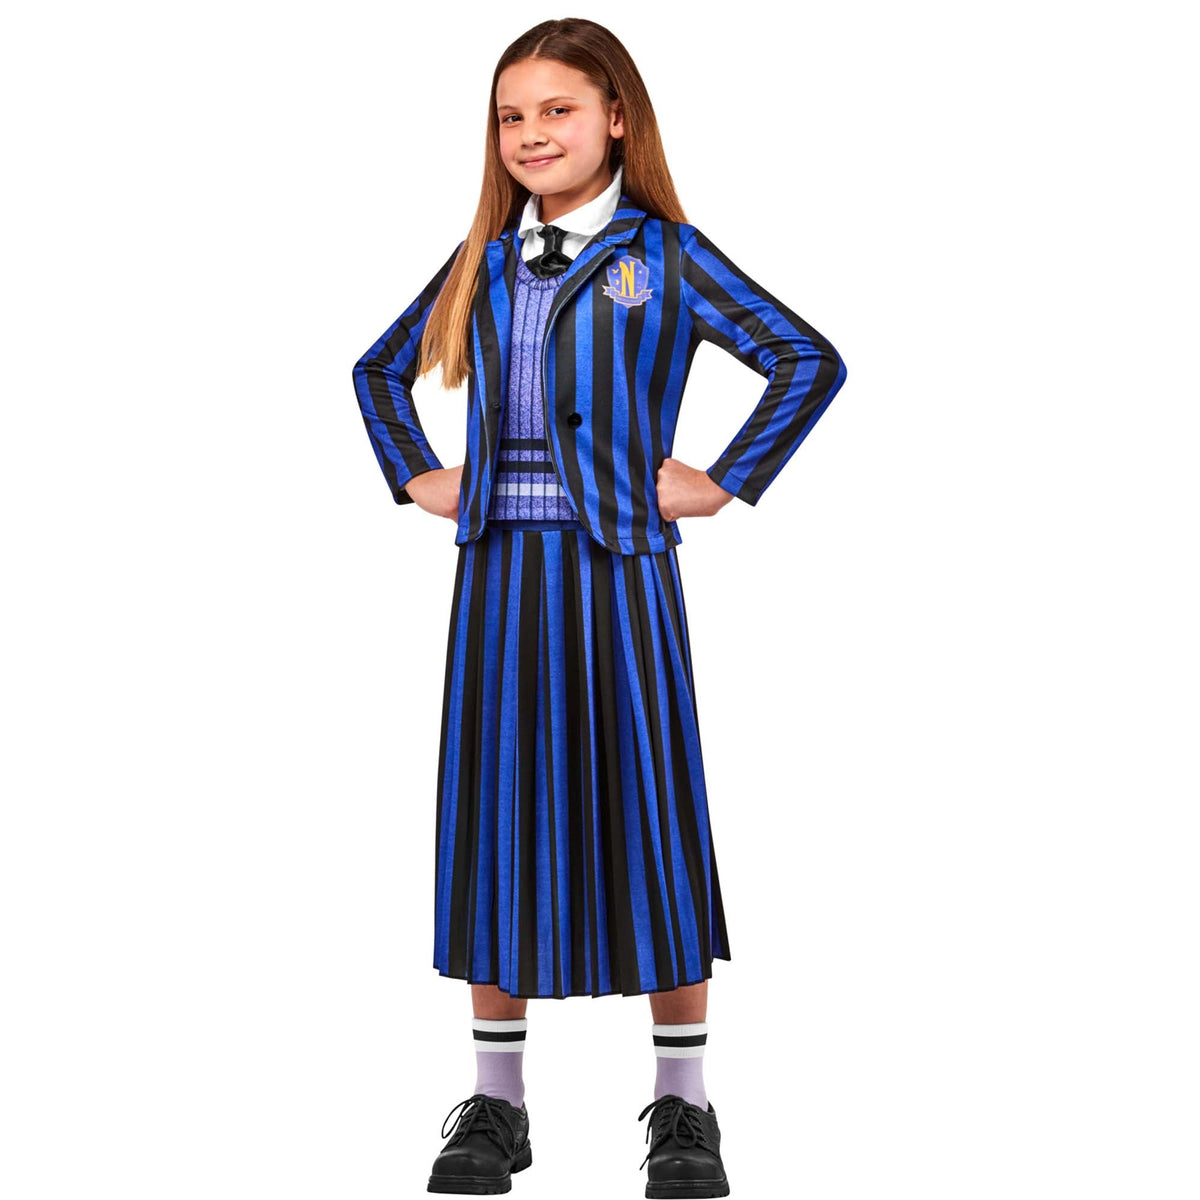 RUBIES II (Ruby Slipper Sales) Costumes Wednesday Academy Uniform Costume for Kids